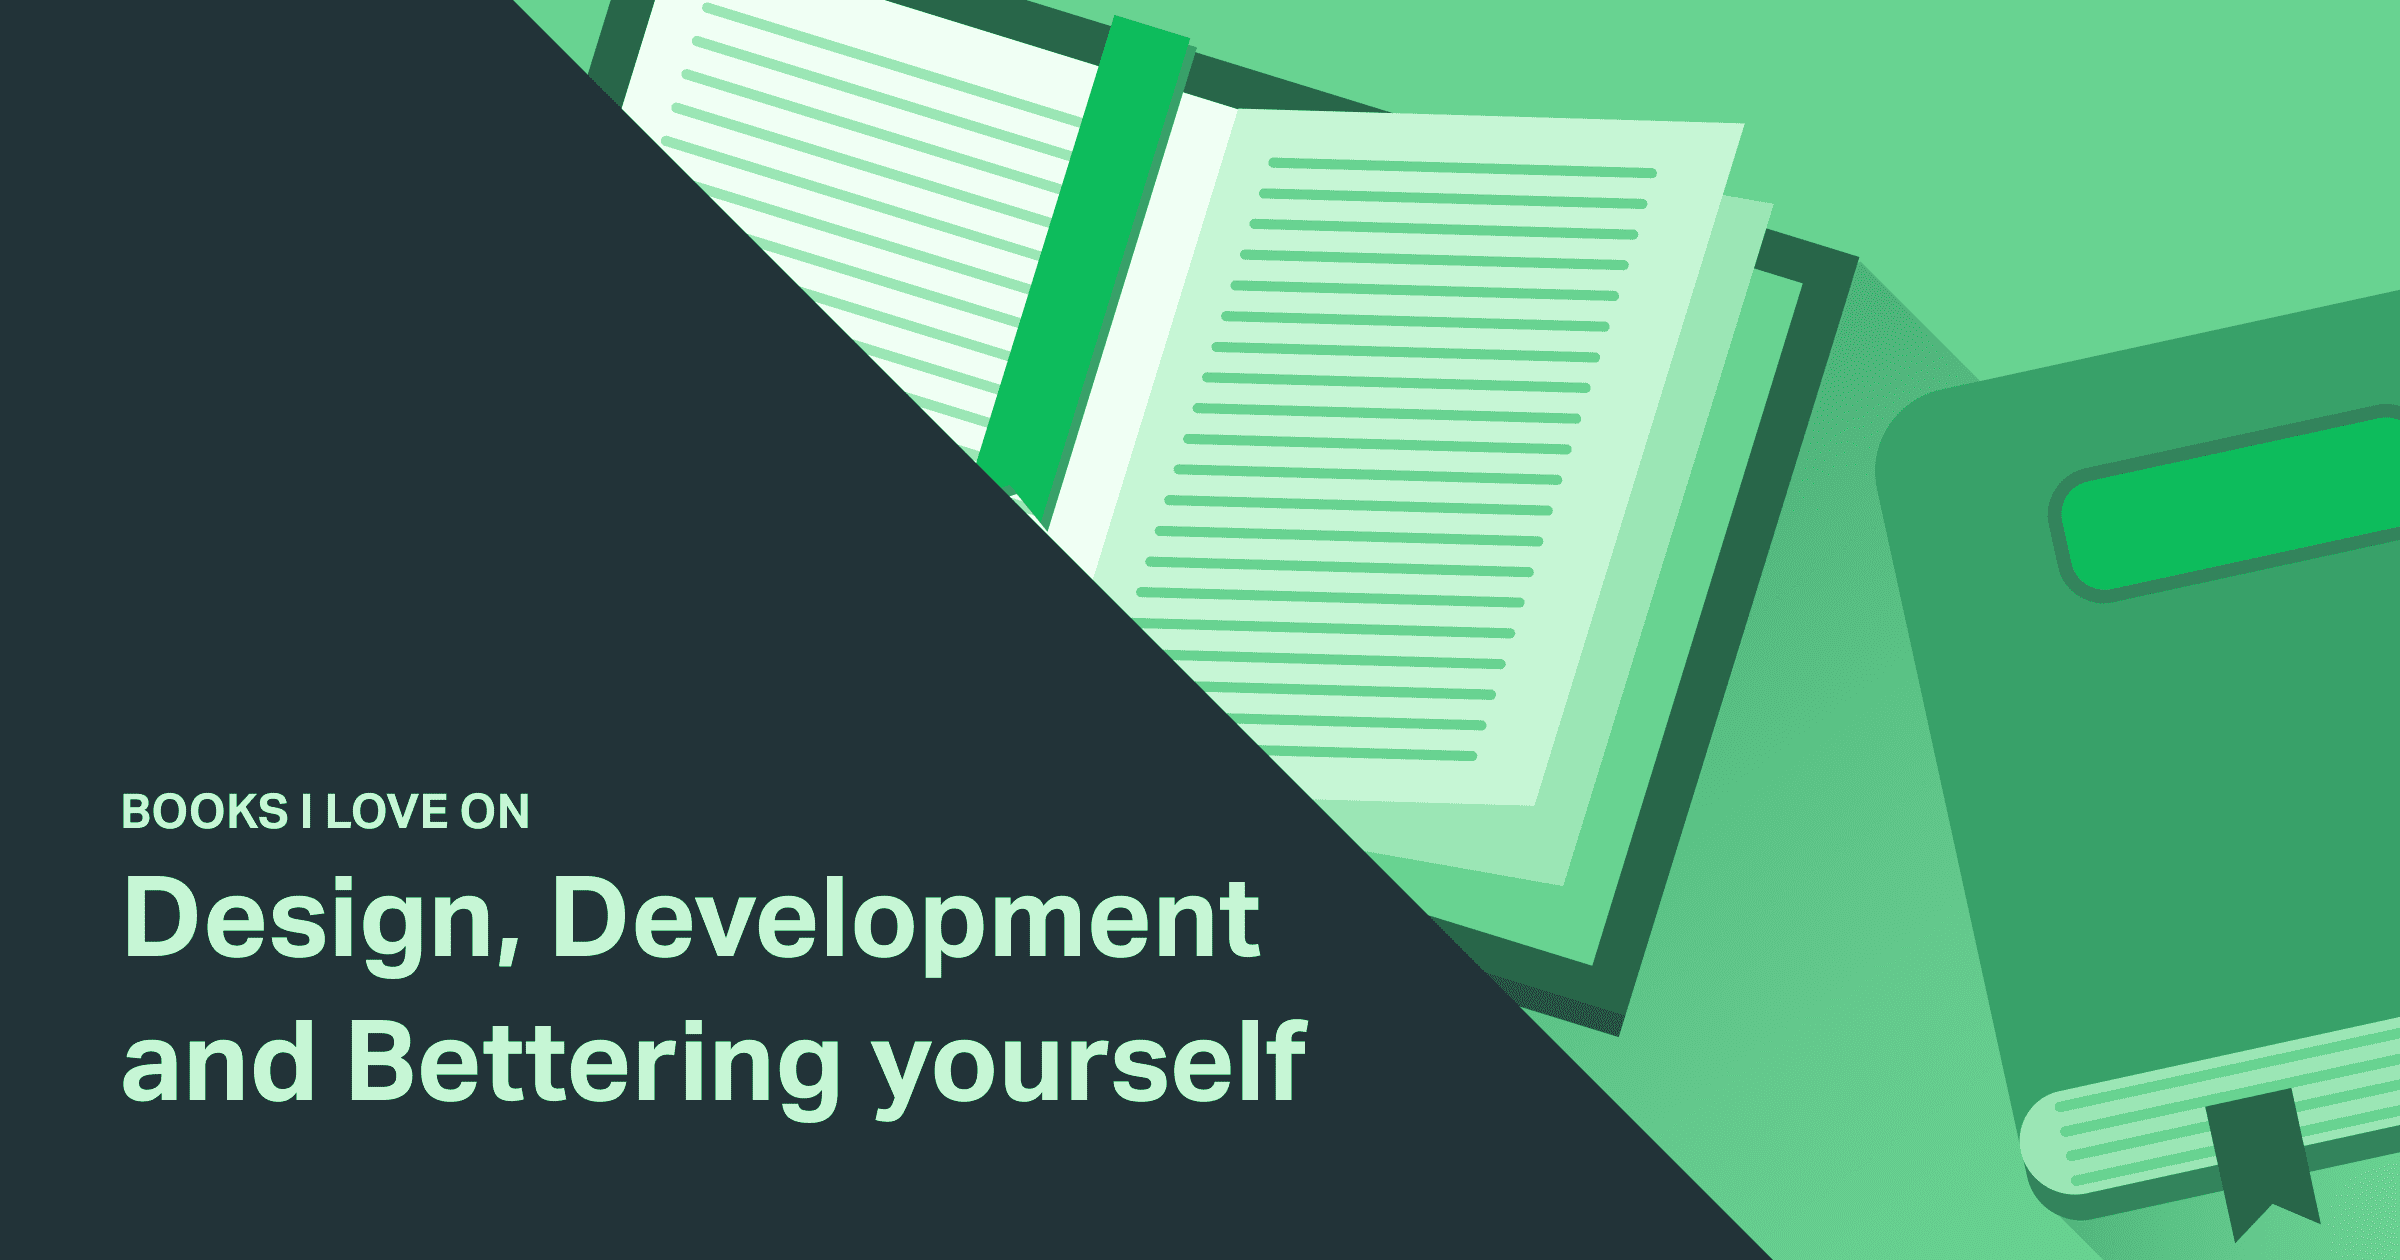 Books I Love on Design, Development and Bettering yourself